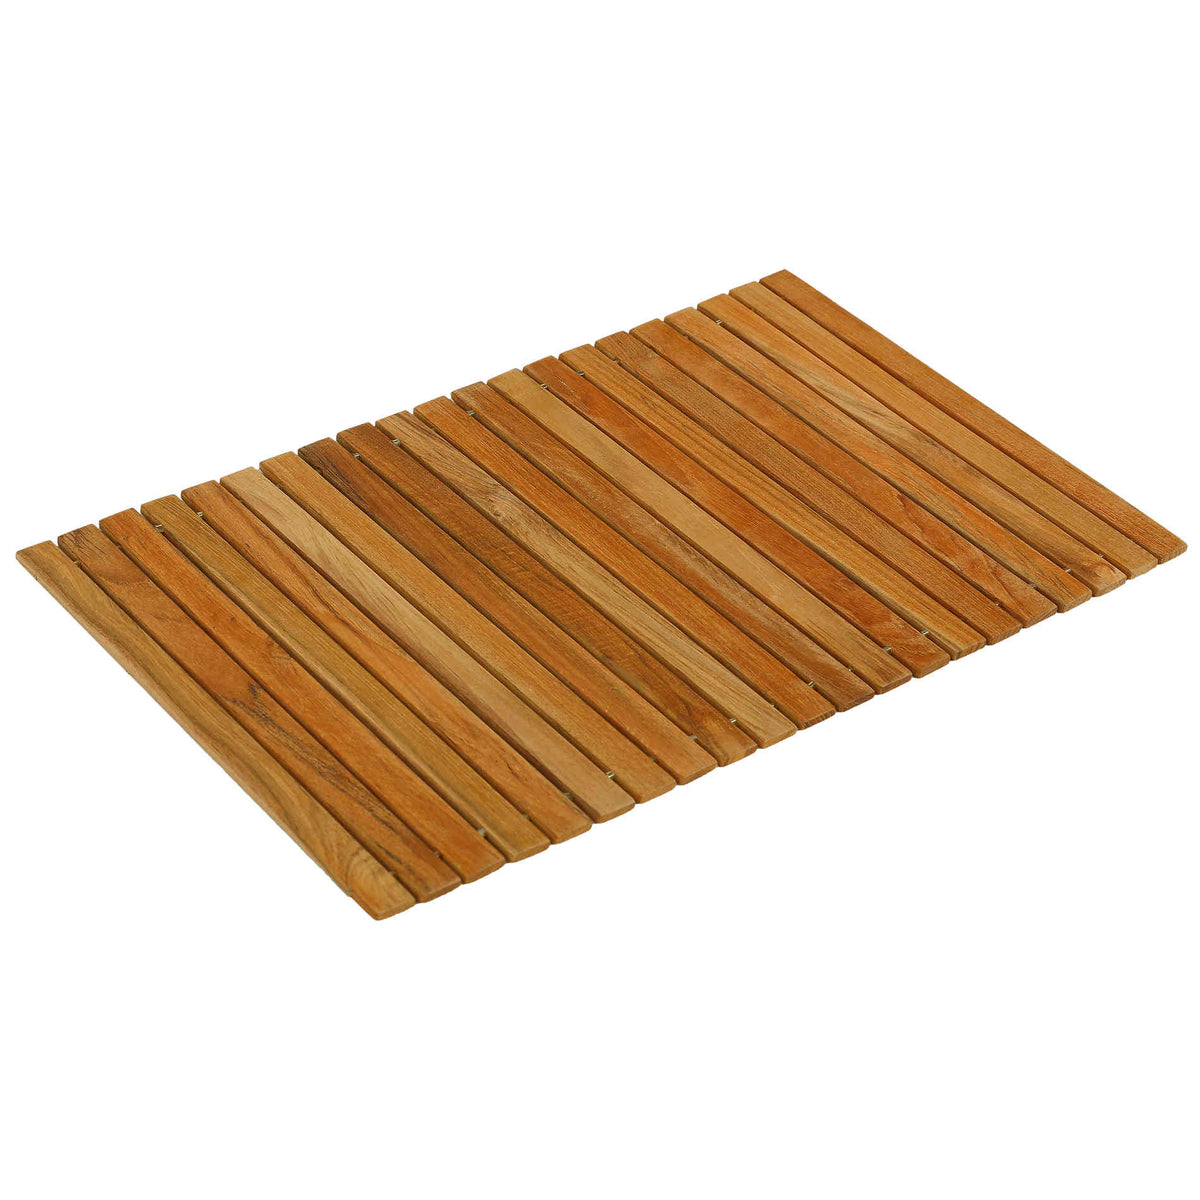 Bare Decor Asi Genuine Teak Wood Flexible Table Top Placemat or Sofa Arm Tray, 1 Mat 19&quot; x 12&quot;